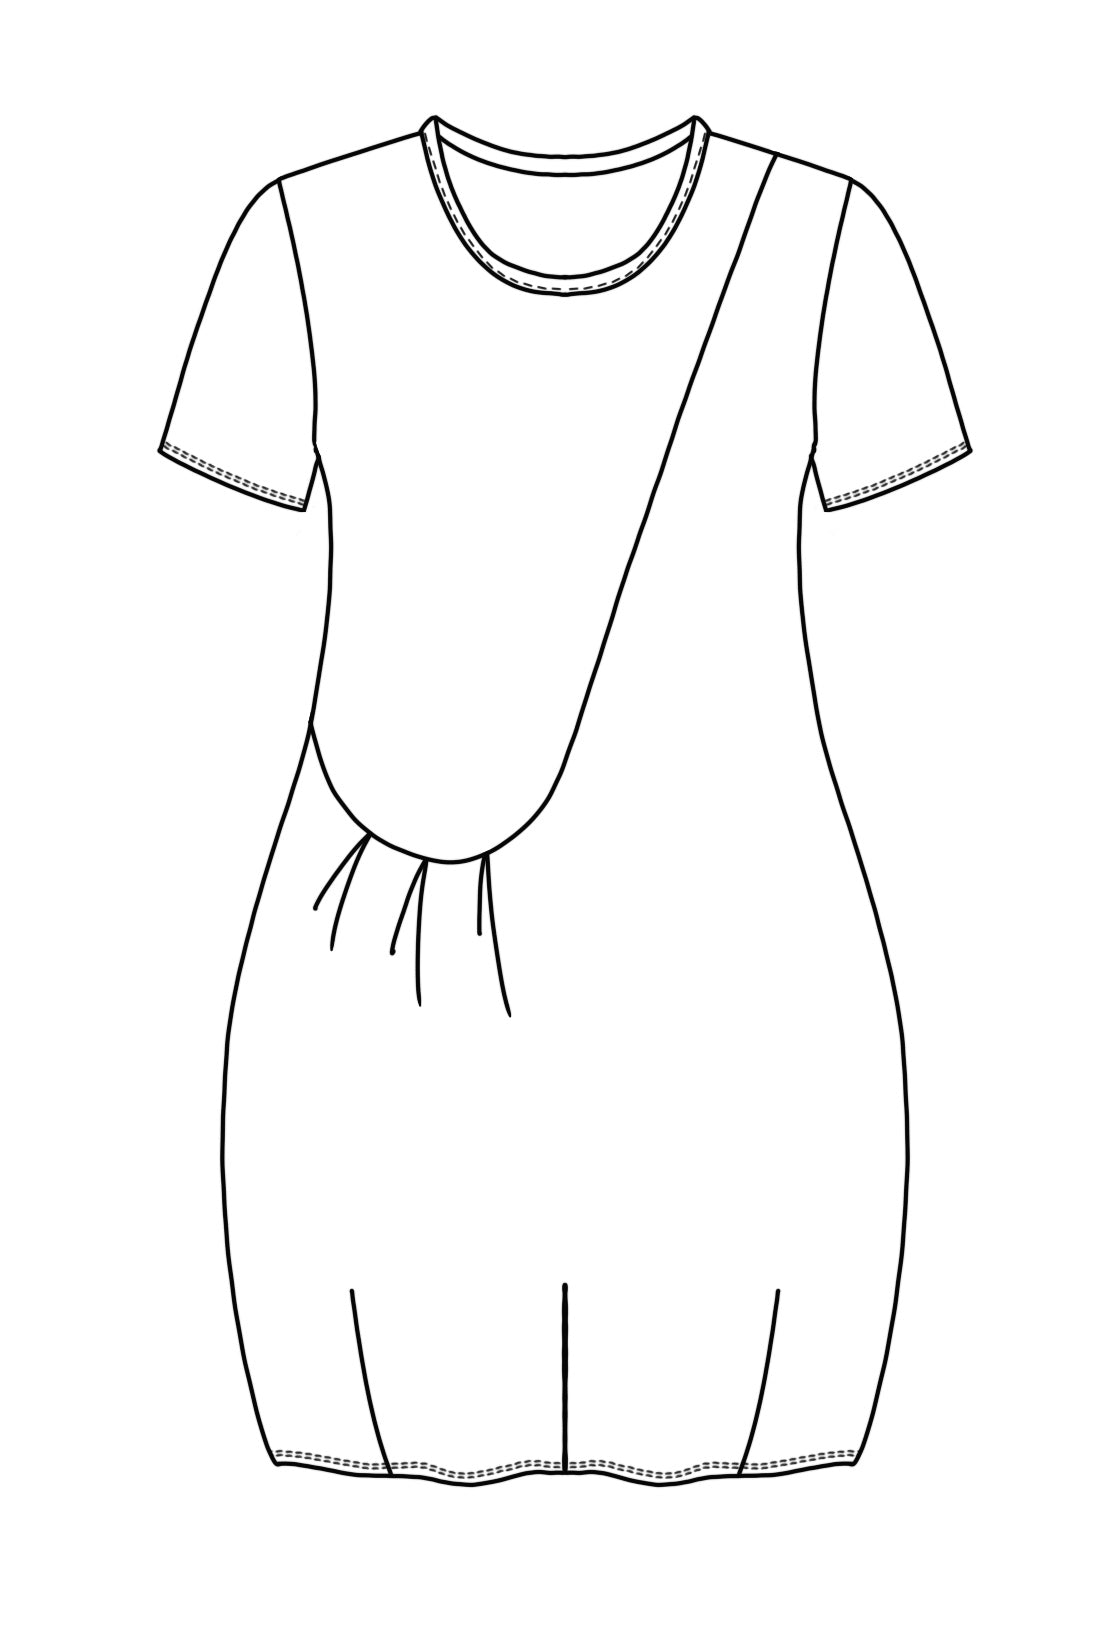 flat drawing of a tunic with one front pocket